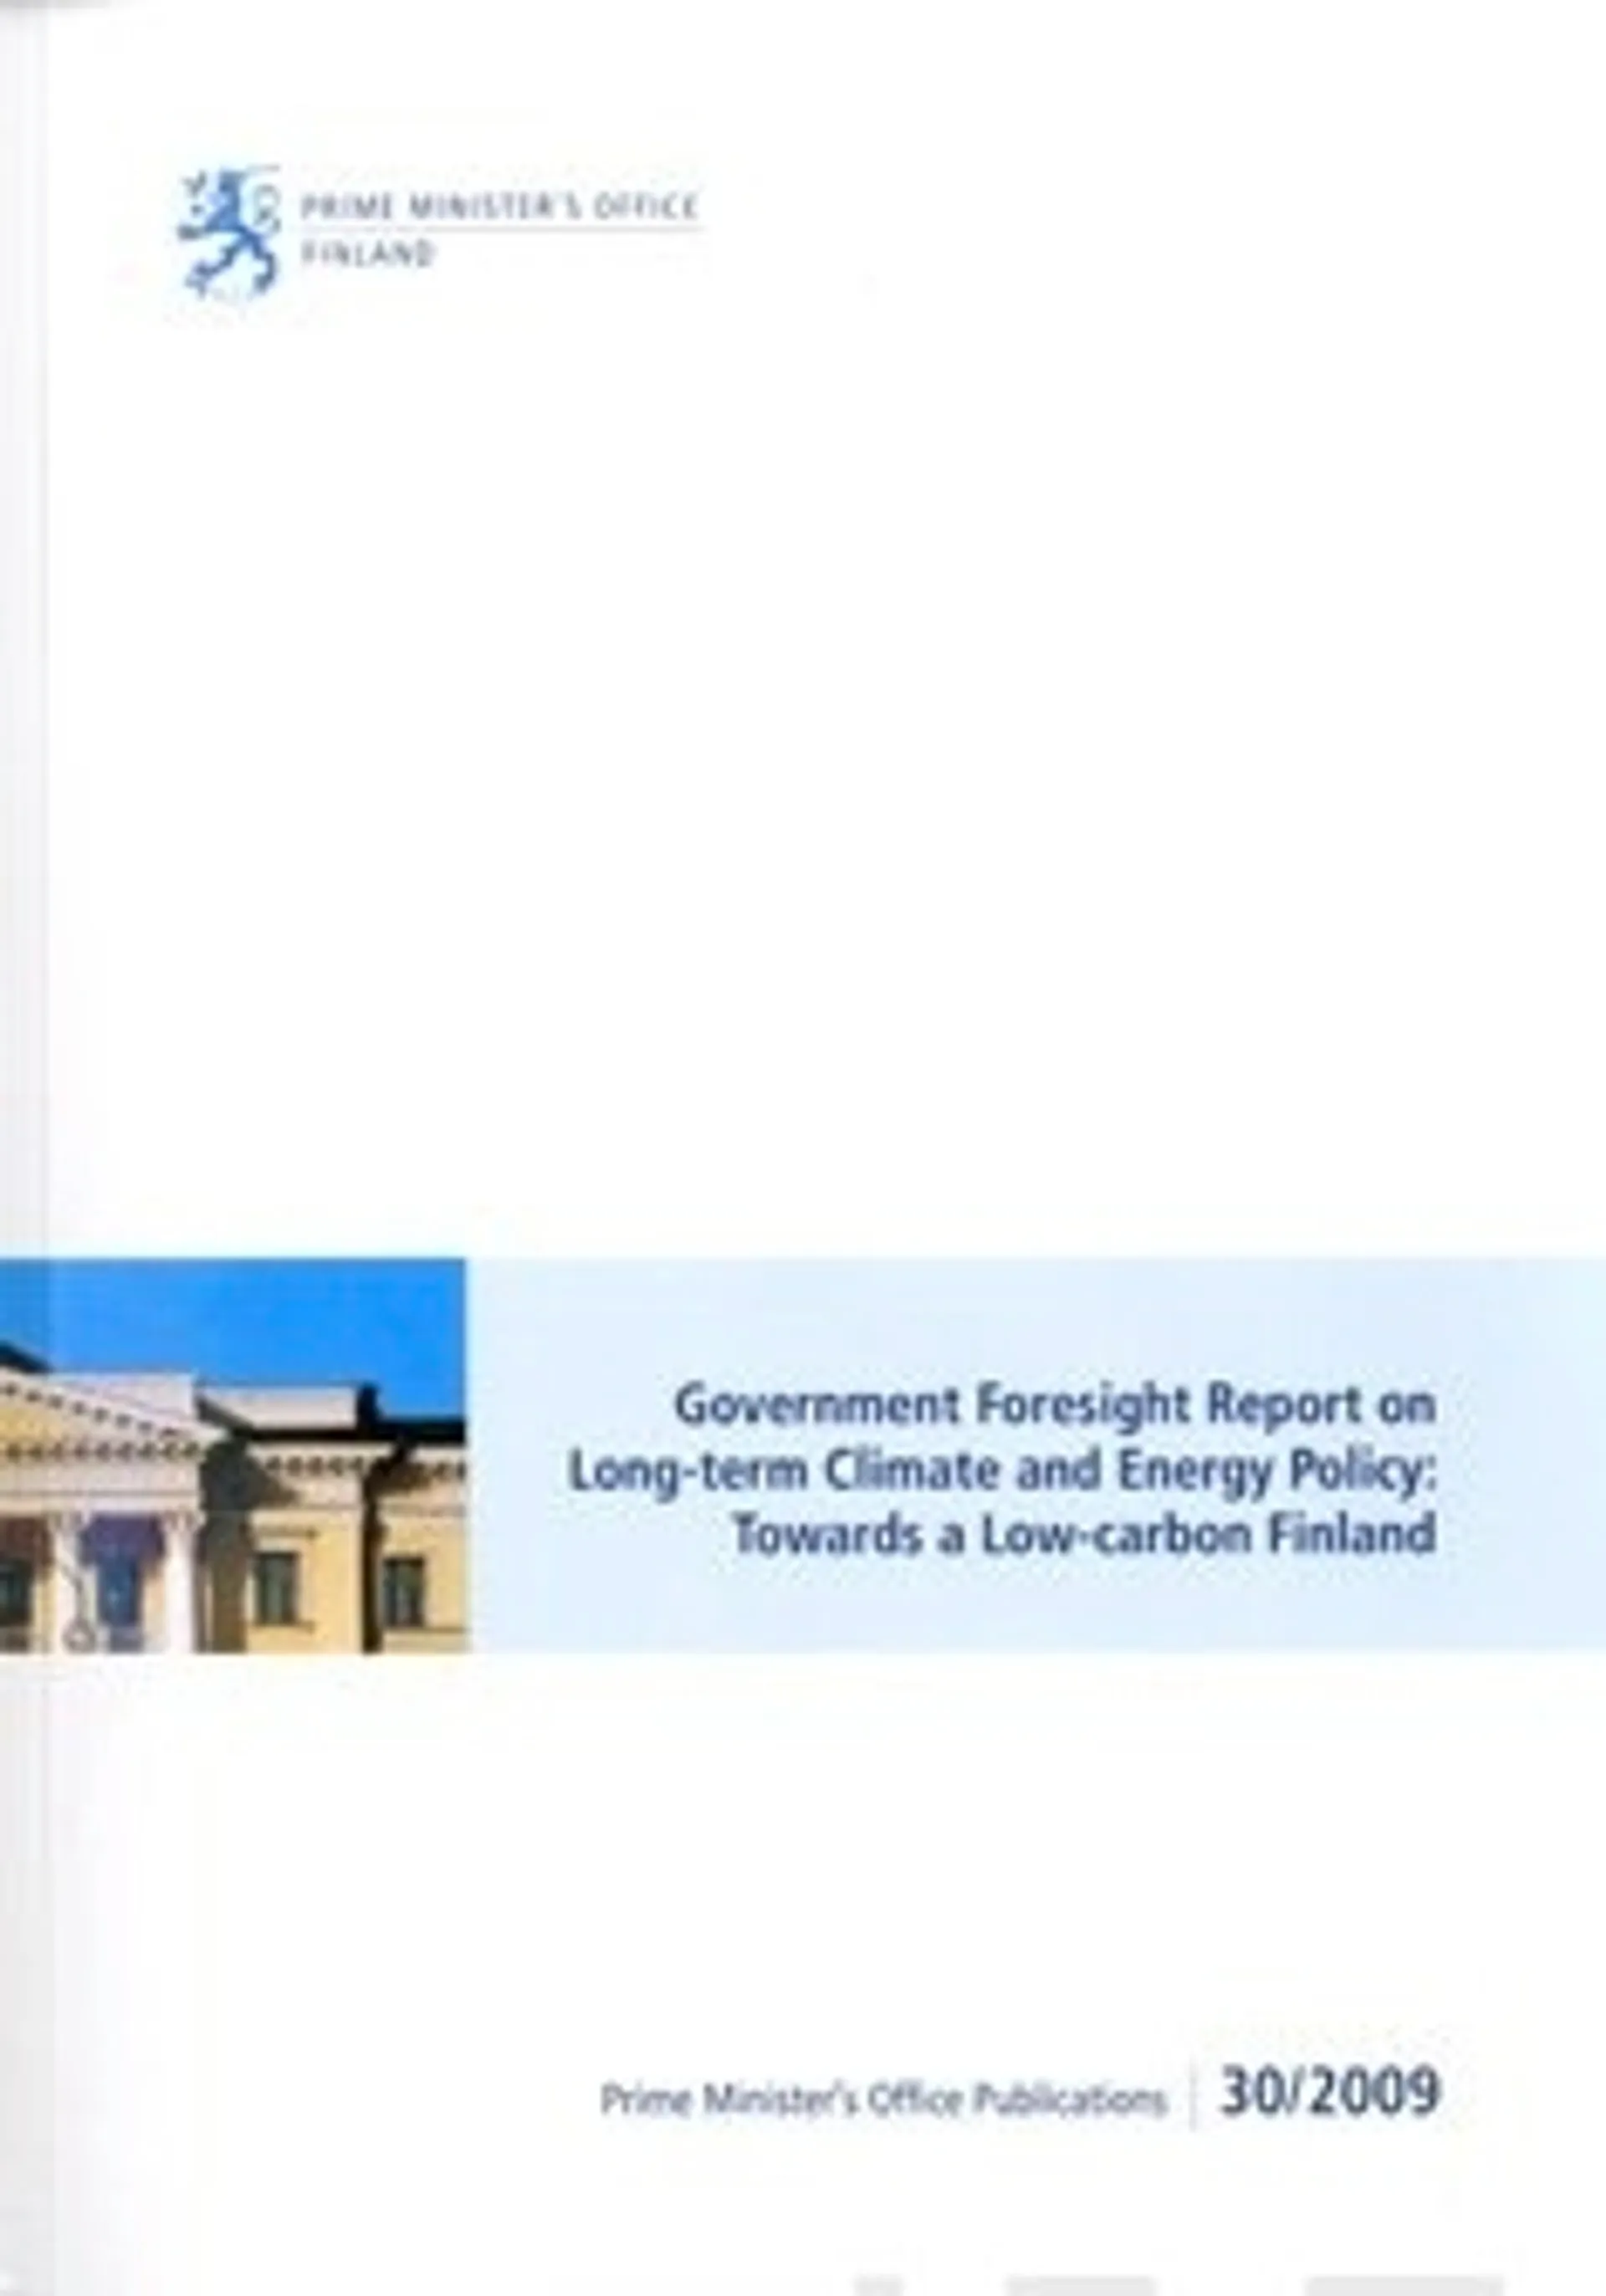 Government foresight report on long-term climate and energy policy